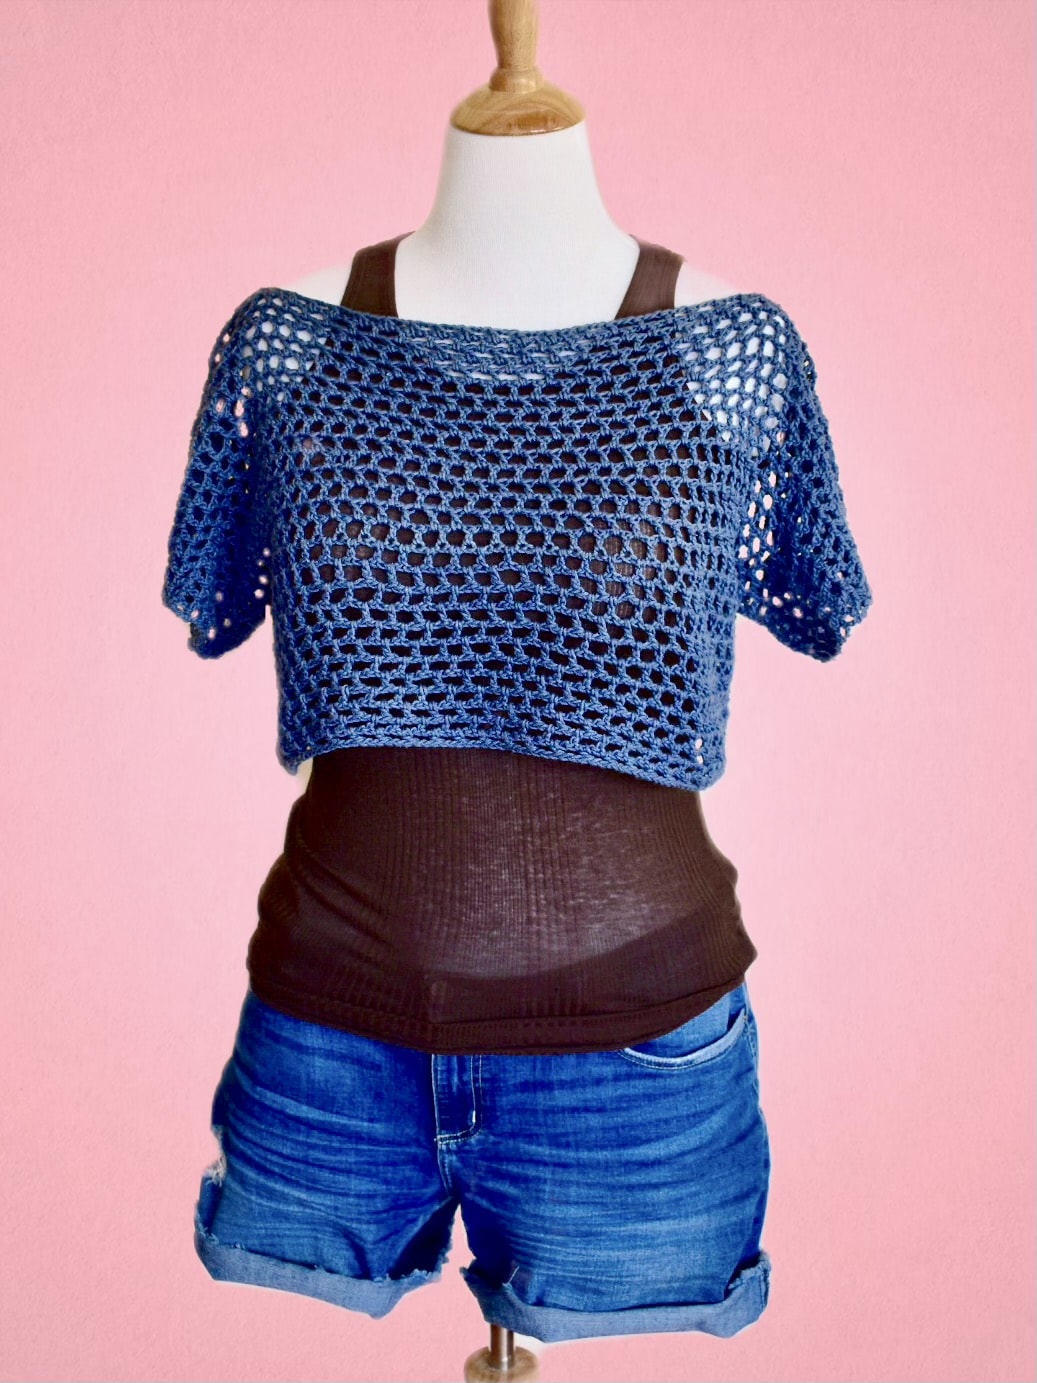 blue crochet crop top on bodice with pink background crochet mesh crop top pattern